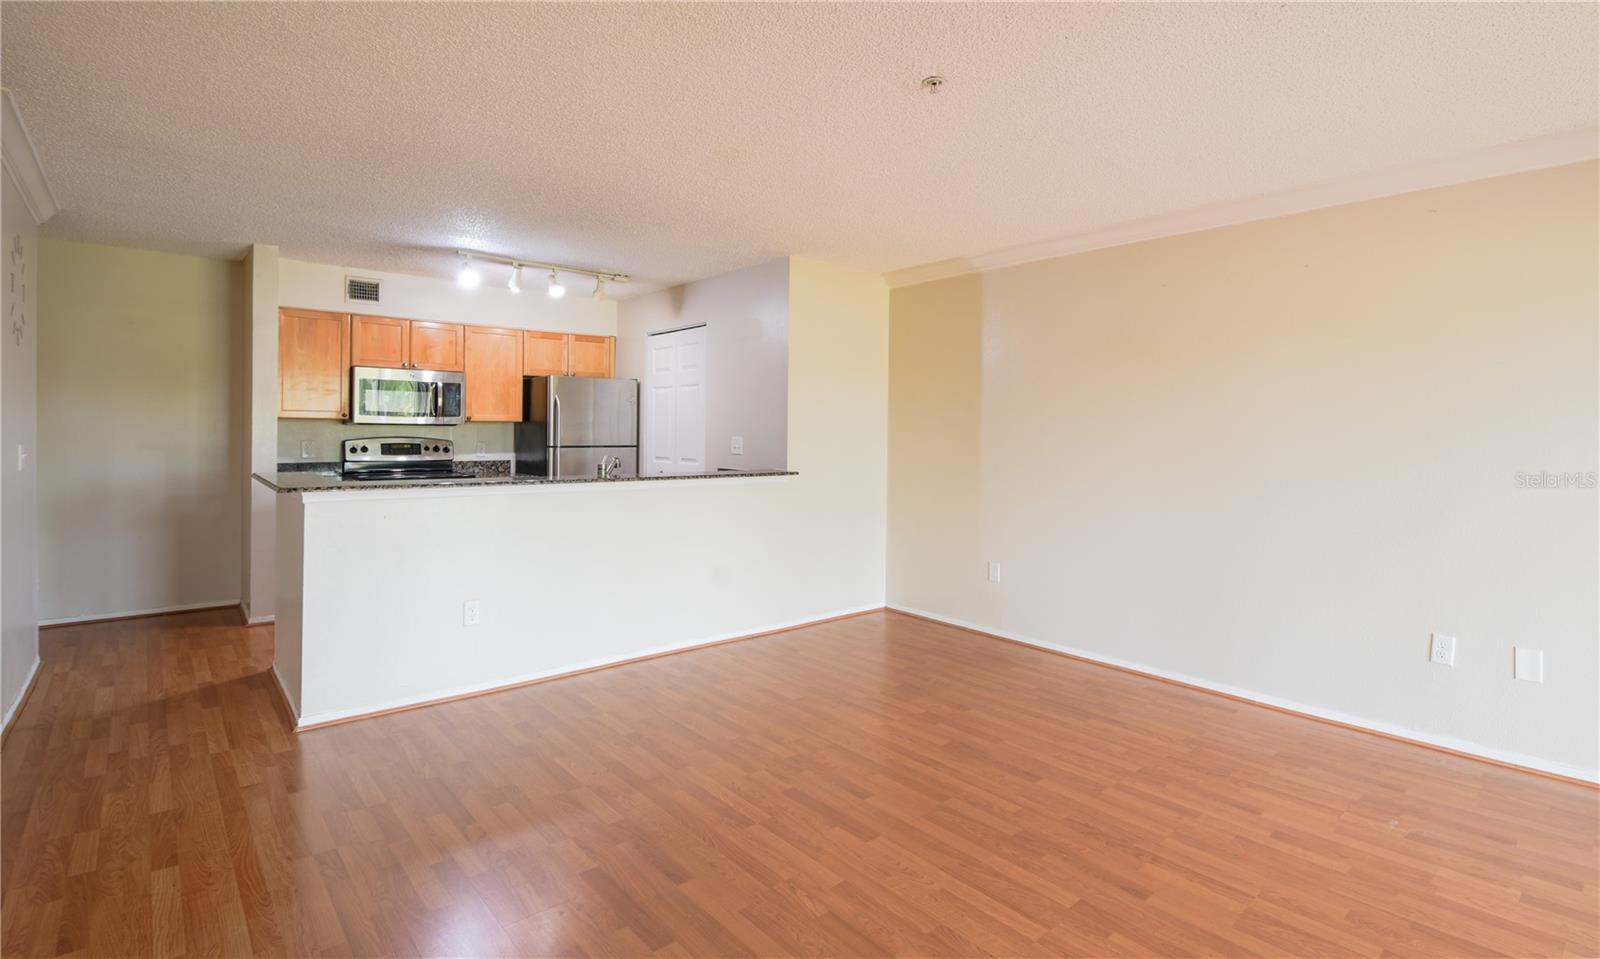 There is wood laminate flooring throughout the home.